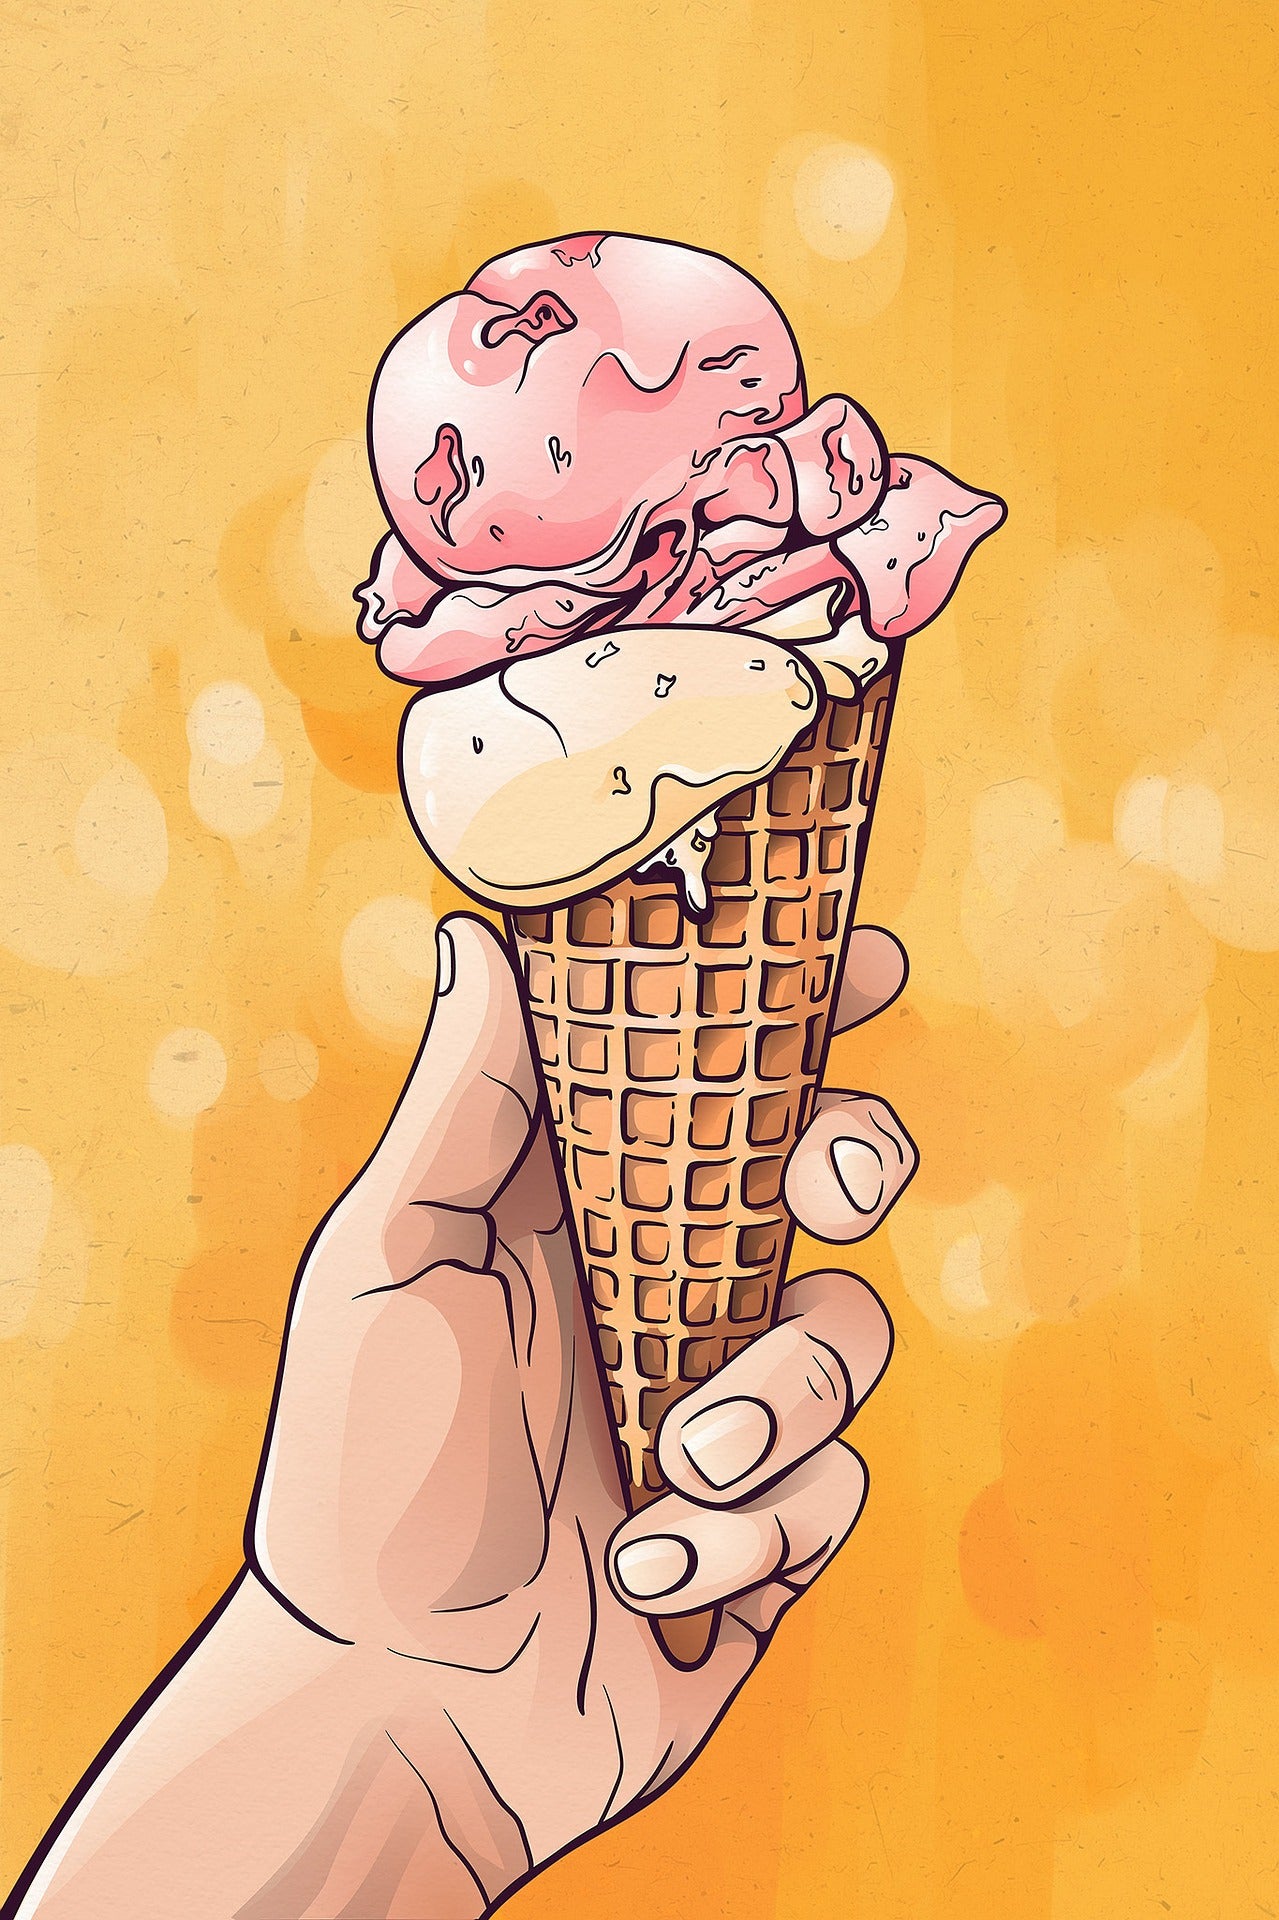 Illustration of a hand holding an ice cream cone with two scoops